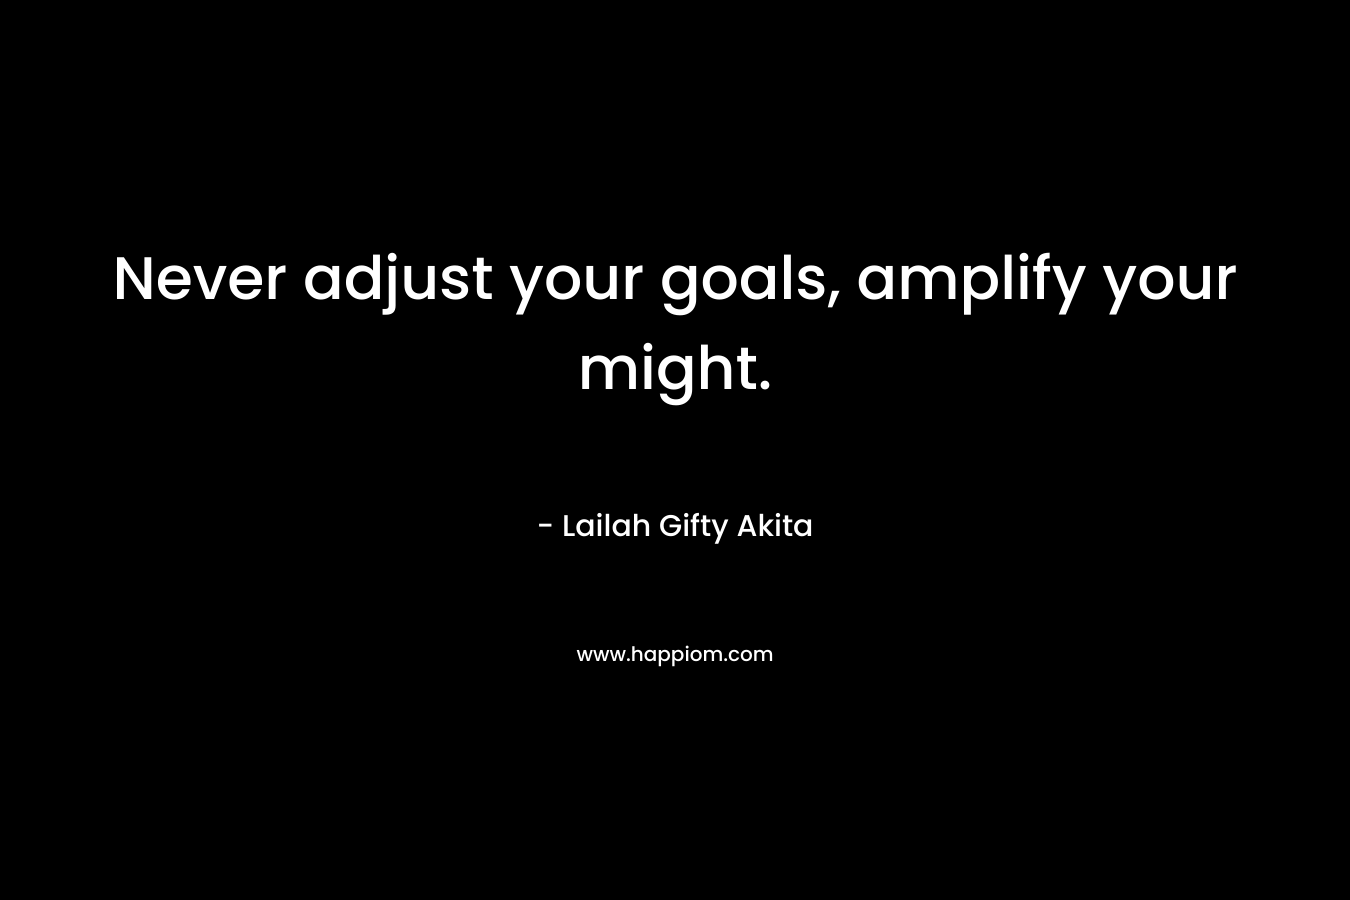 Never adjust your goals, amplify your might. – Lailah Gifty Akita